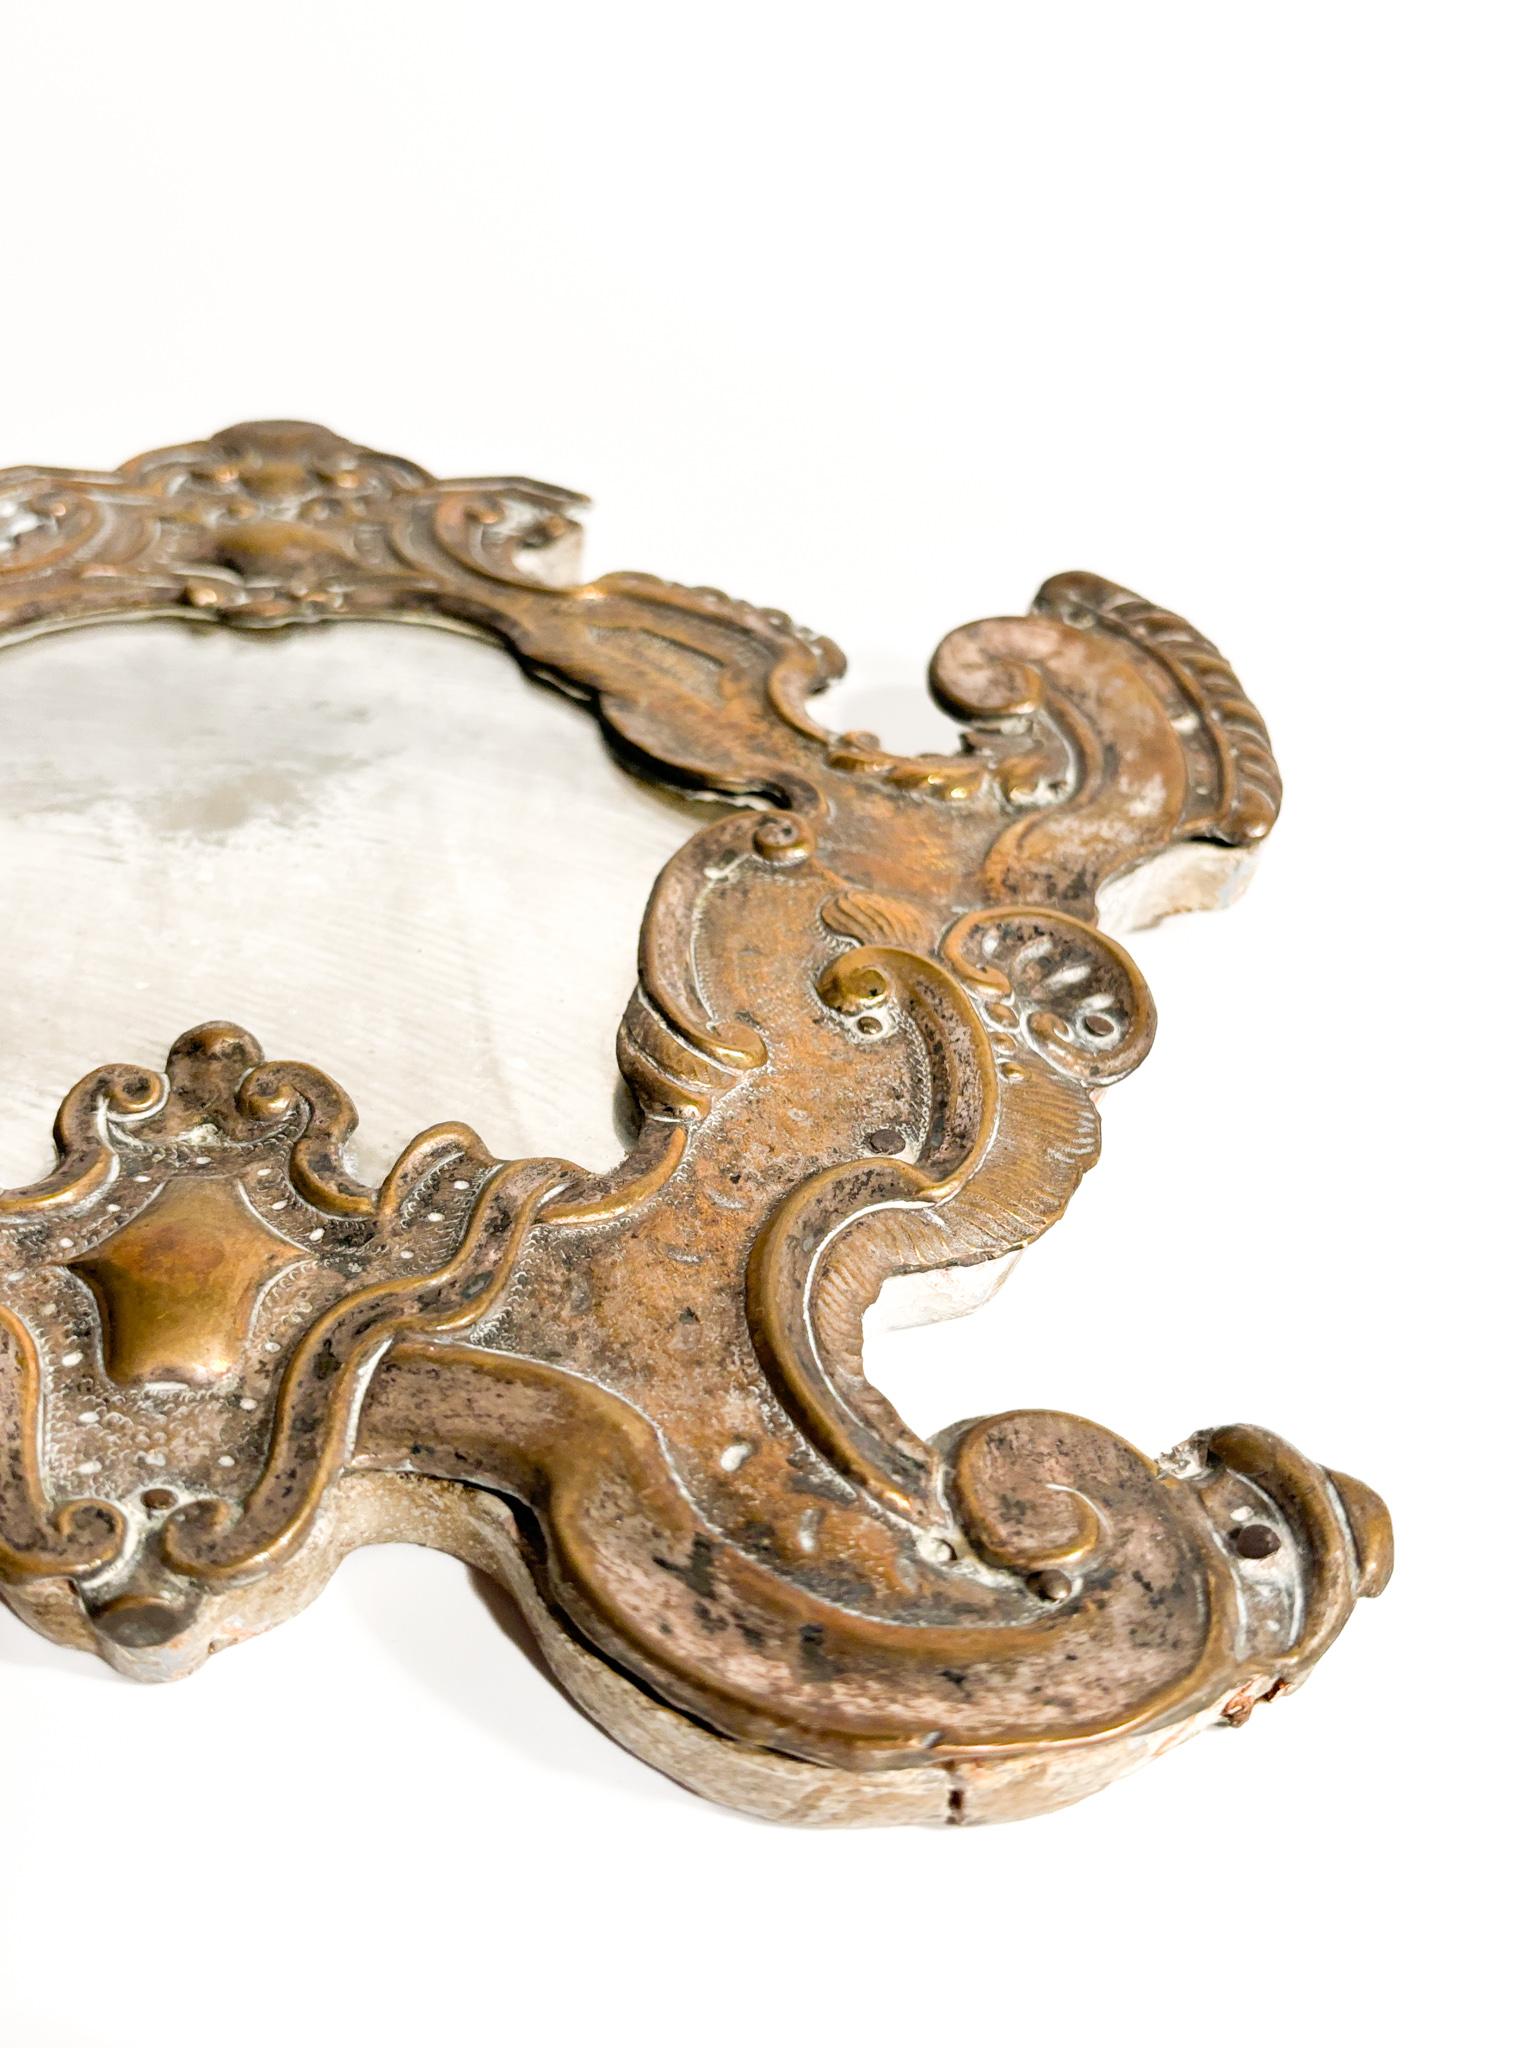 Silver Mirror on Wood with Mercury Mirror Late 19th Century For Sale 1